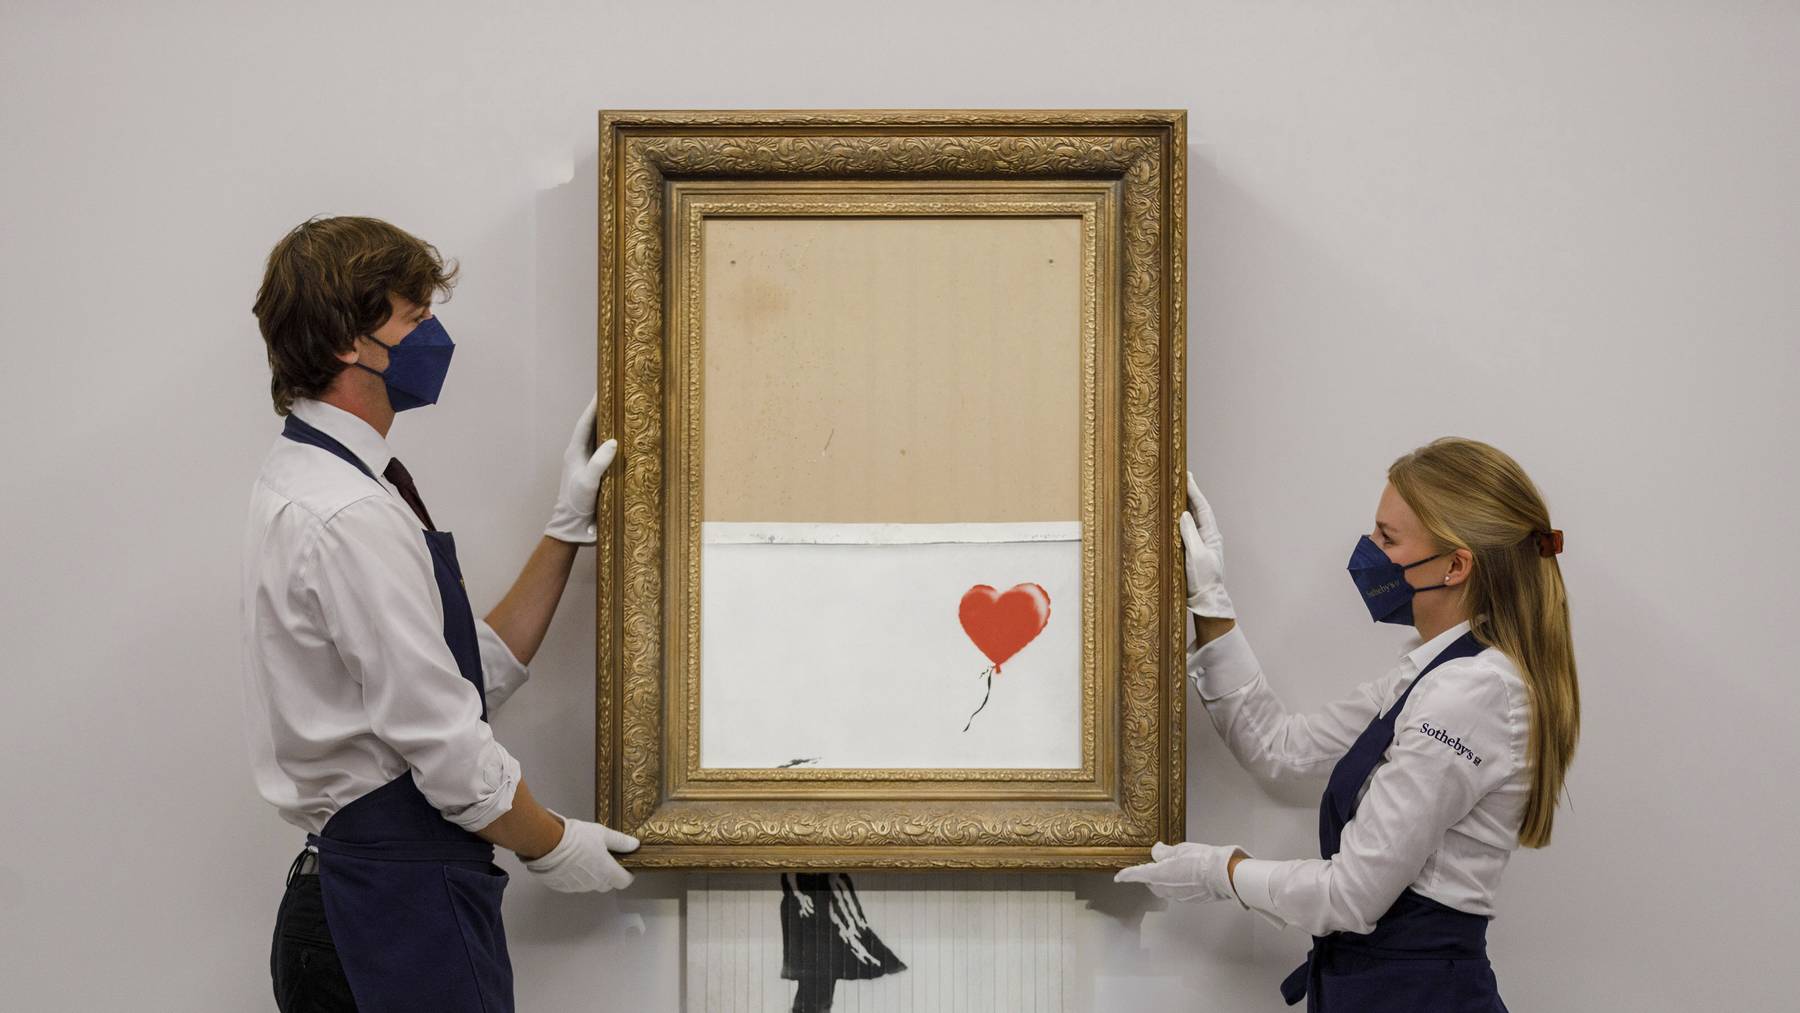 In this handout photo provided by Sotheby's Auction House, the auction for Banksy's «Love is the Bin» takes place in London, Thursday, Oct. 14, 2021. A work by British street artist Banksy that sensationally self-shredded just after it sold for $1.4 million has sold again for $25.4 million at an auction on Thursday. âÄ&#x153;Love is in the BinâÄ was offered by SothebyâÄ&#x2122;s in London, with a presale estimate of $5.5 million to $8.2 million.